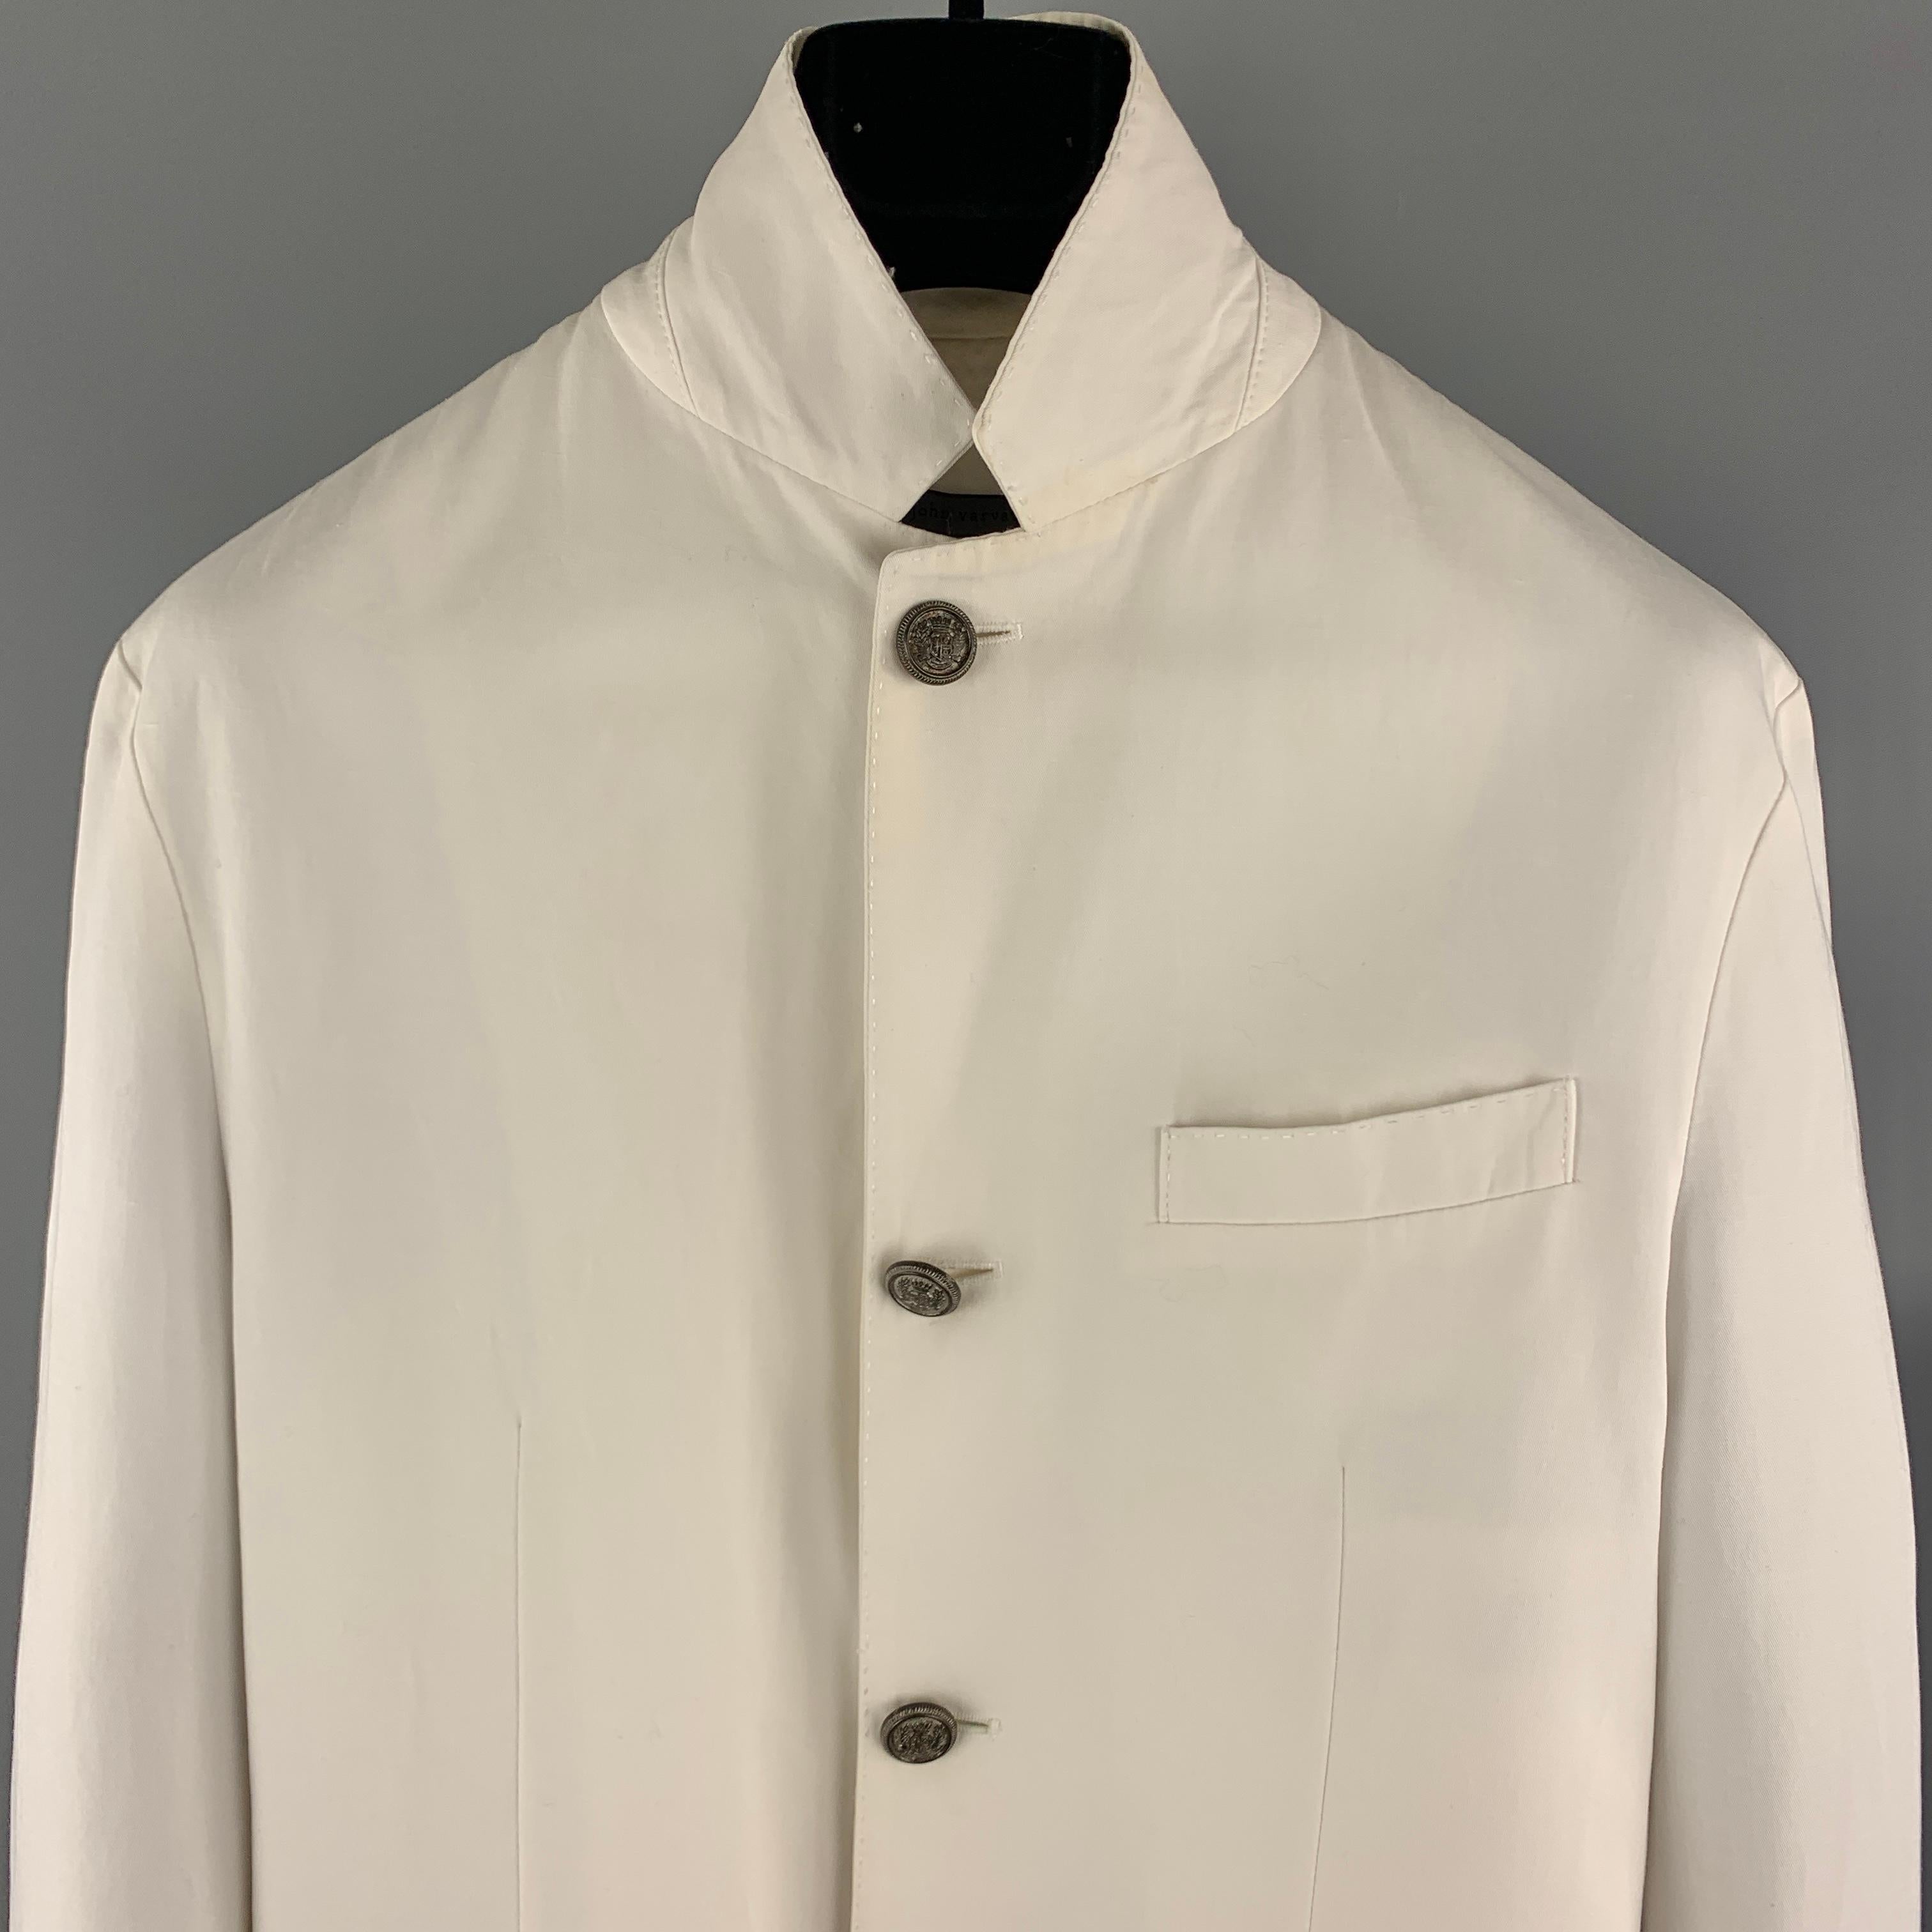 JOHN VARVATOS Jacket comes in a white cotton / linen material, featuring embossed silver metal four buttons at closure, single breasted, slit and flap pockets, functional buttons at cuffs, a single vent at back, unlined. Minor wear at inner collar.